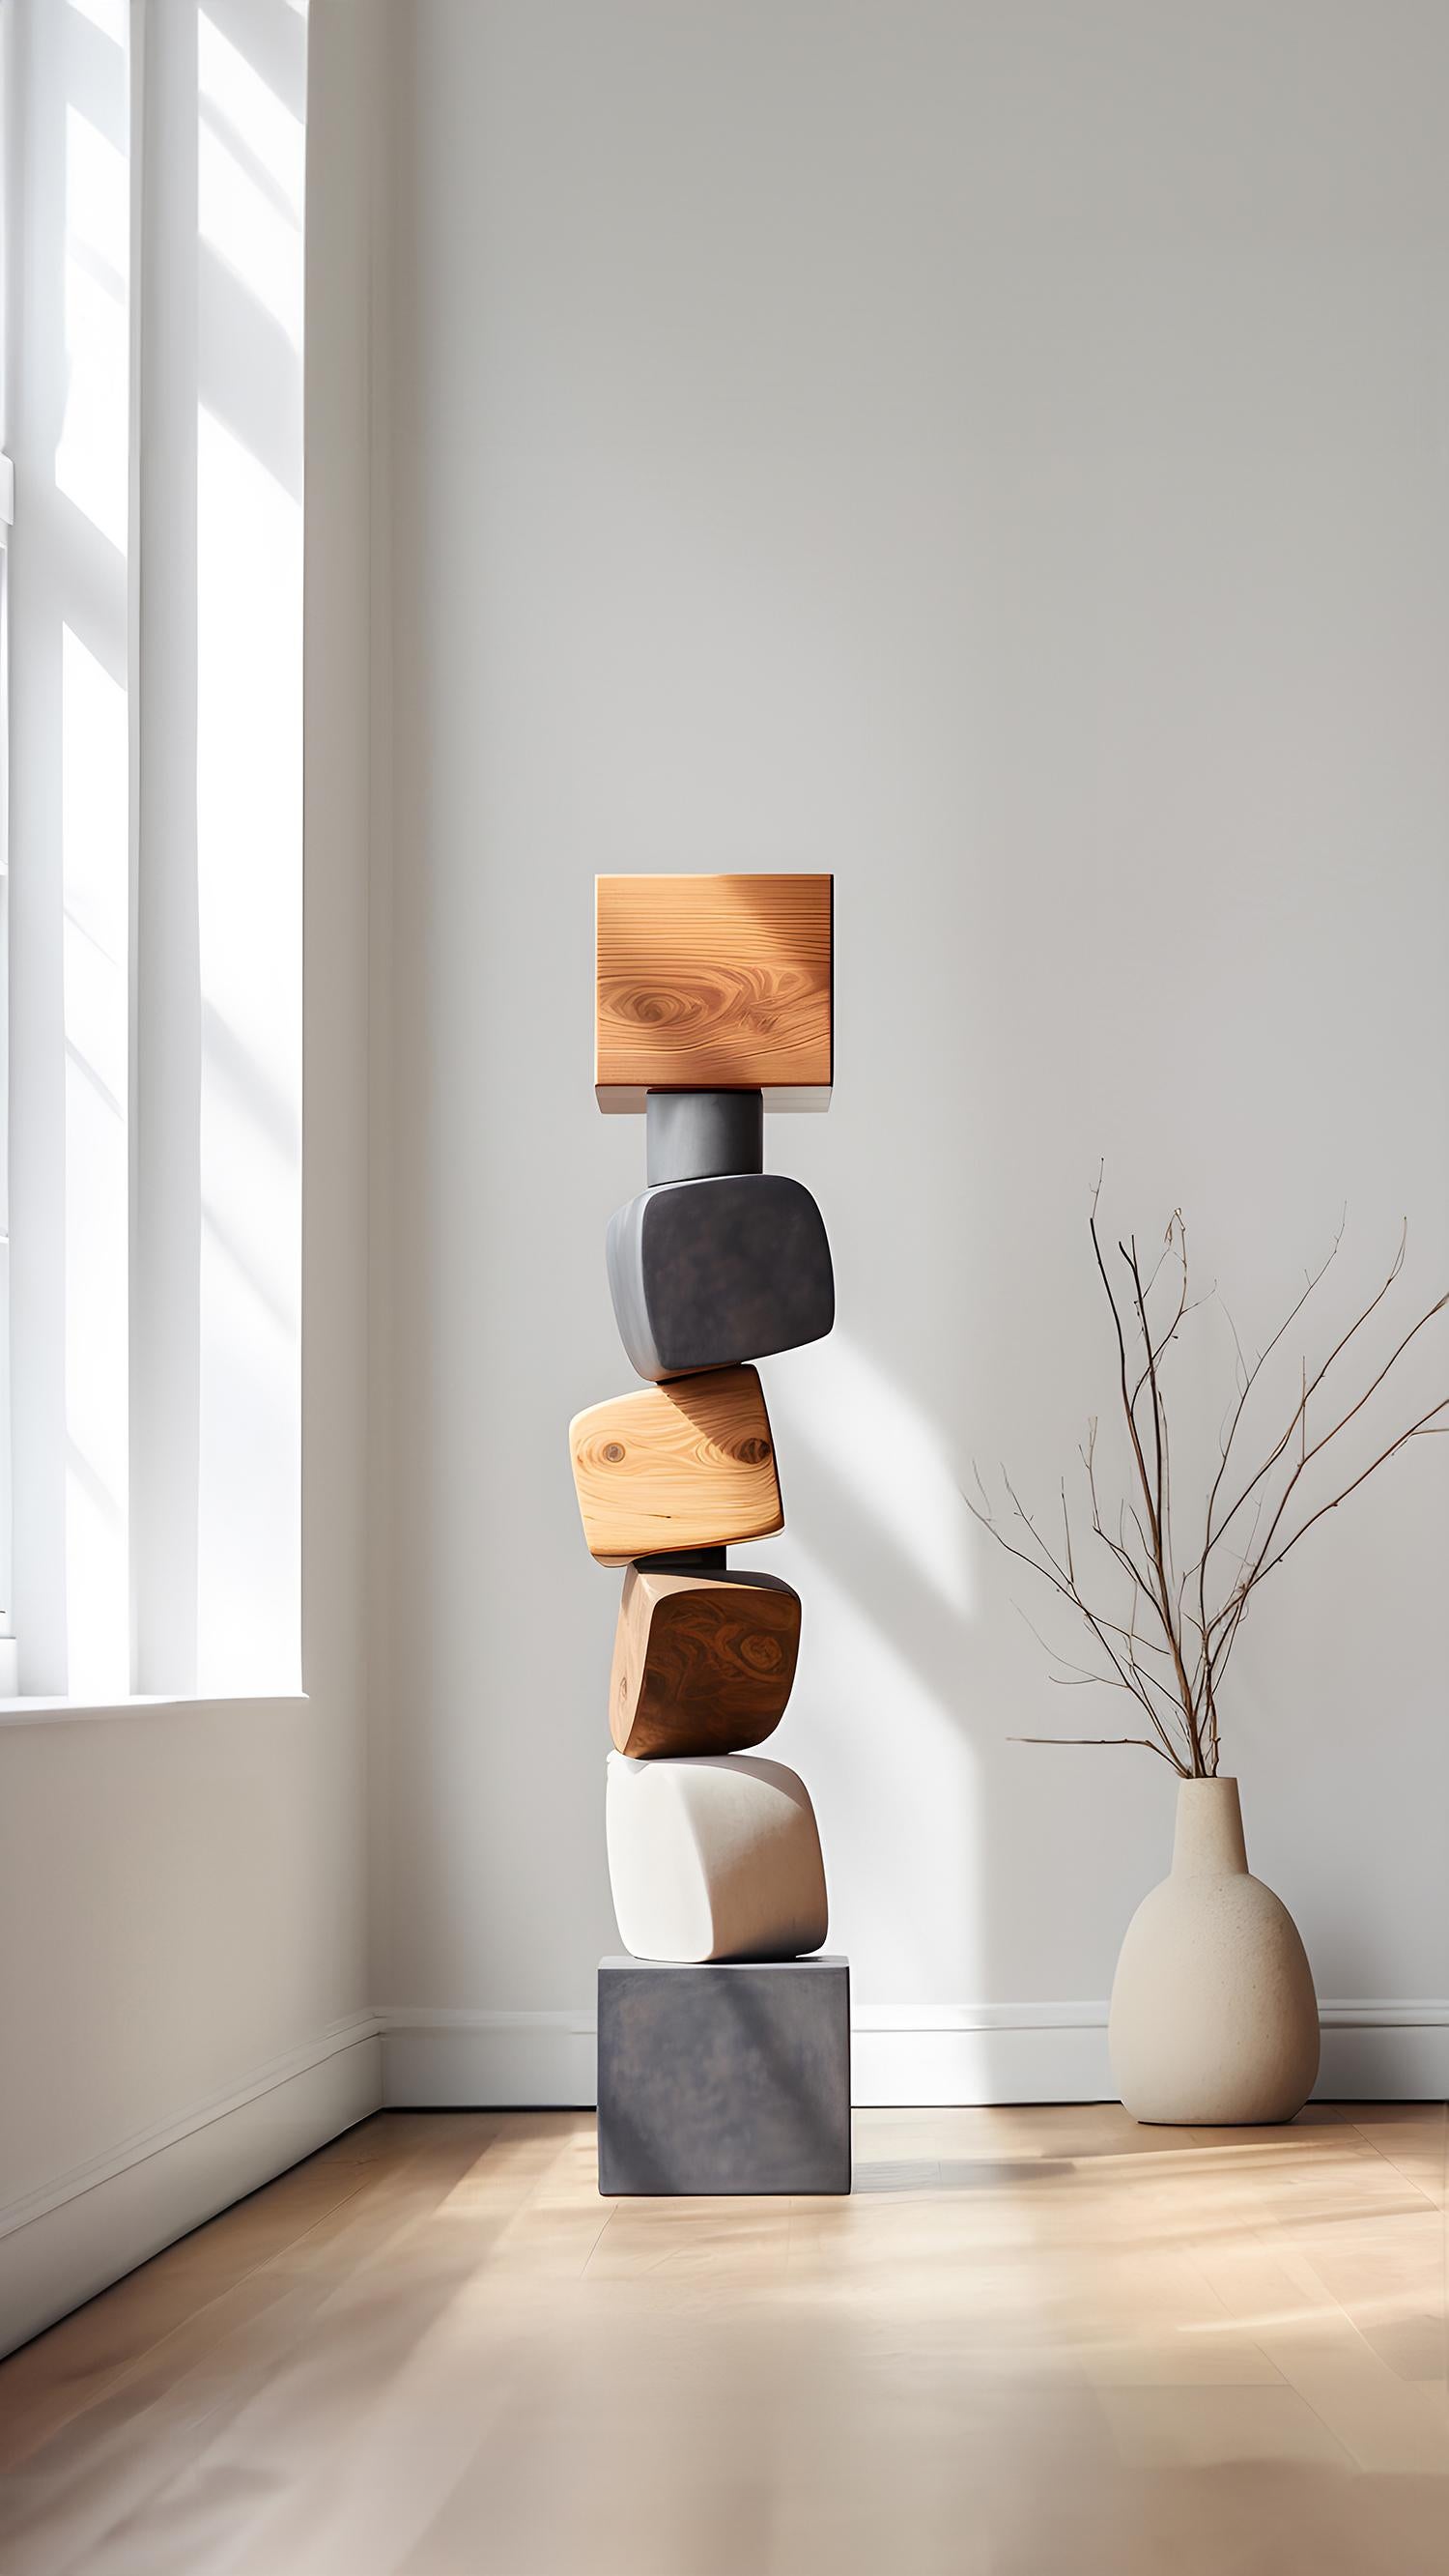 Hand-Crafted Still Stand No38: Elegant Wooden Standing Totem, A NONO Escalona Masterpiece For Sale